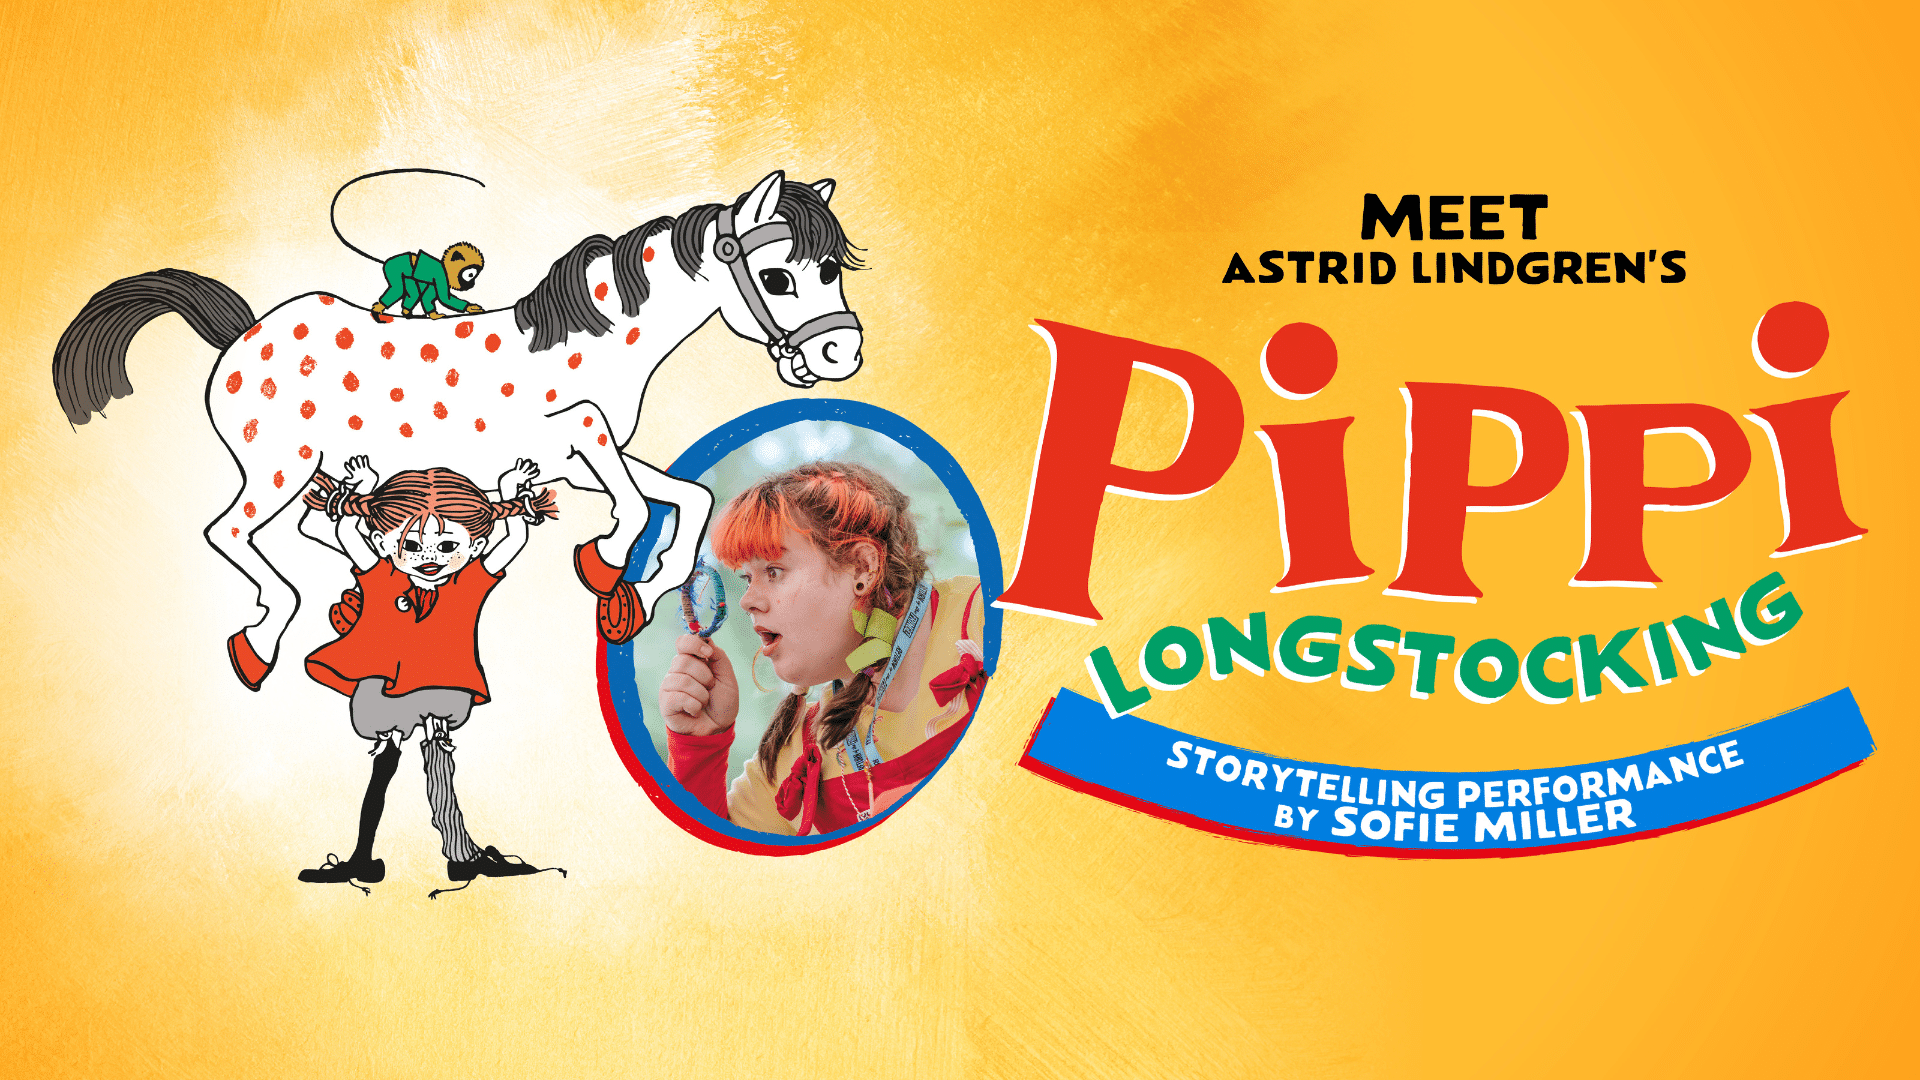 Meet Astrid Lindgren's Pippi Longstocking promotional artwork - An illustration of Pippi Longstocking, a small girl with red hair on pigtails, wearing a red top and mismatched trouser legs, lifting a white red-spotted horse above her head. There is a small monkey on the horse's back. Next to the illustration is a photo of Sofie Miller as Pippi Longstocking inside an oval shaped frame. She looks with wonder through a magnifying glass. Text on the right reads: 'Meet Astrid Lindgren's Pippi Longstocking; Storytelling performance by Sofie Miller'. The background is a yellow-orange colour.